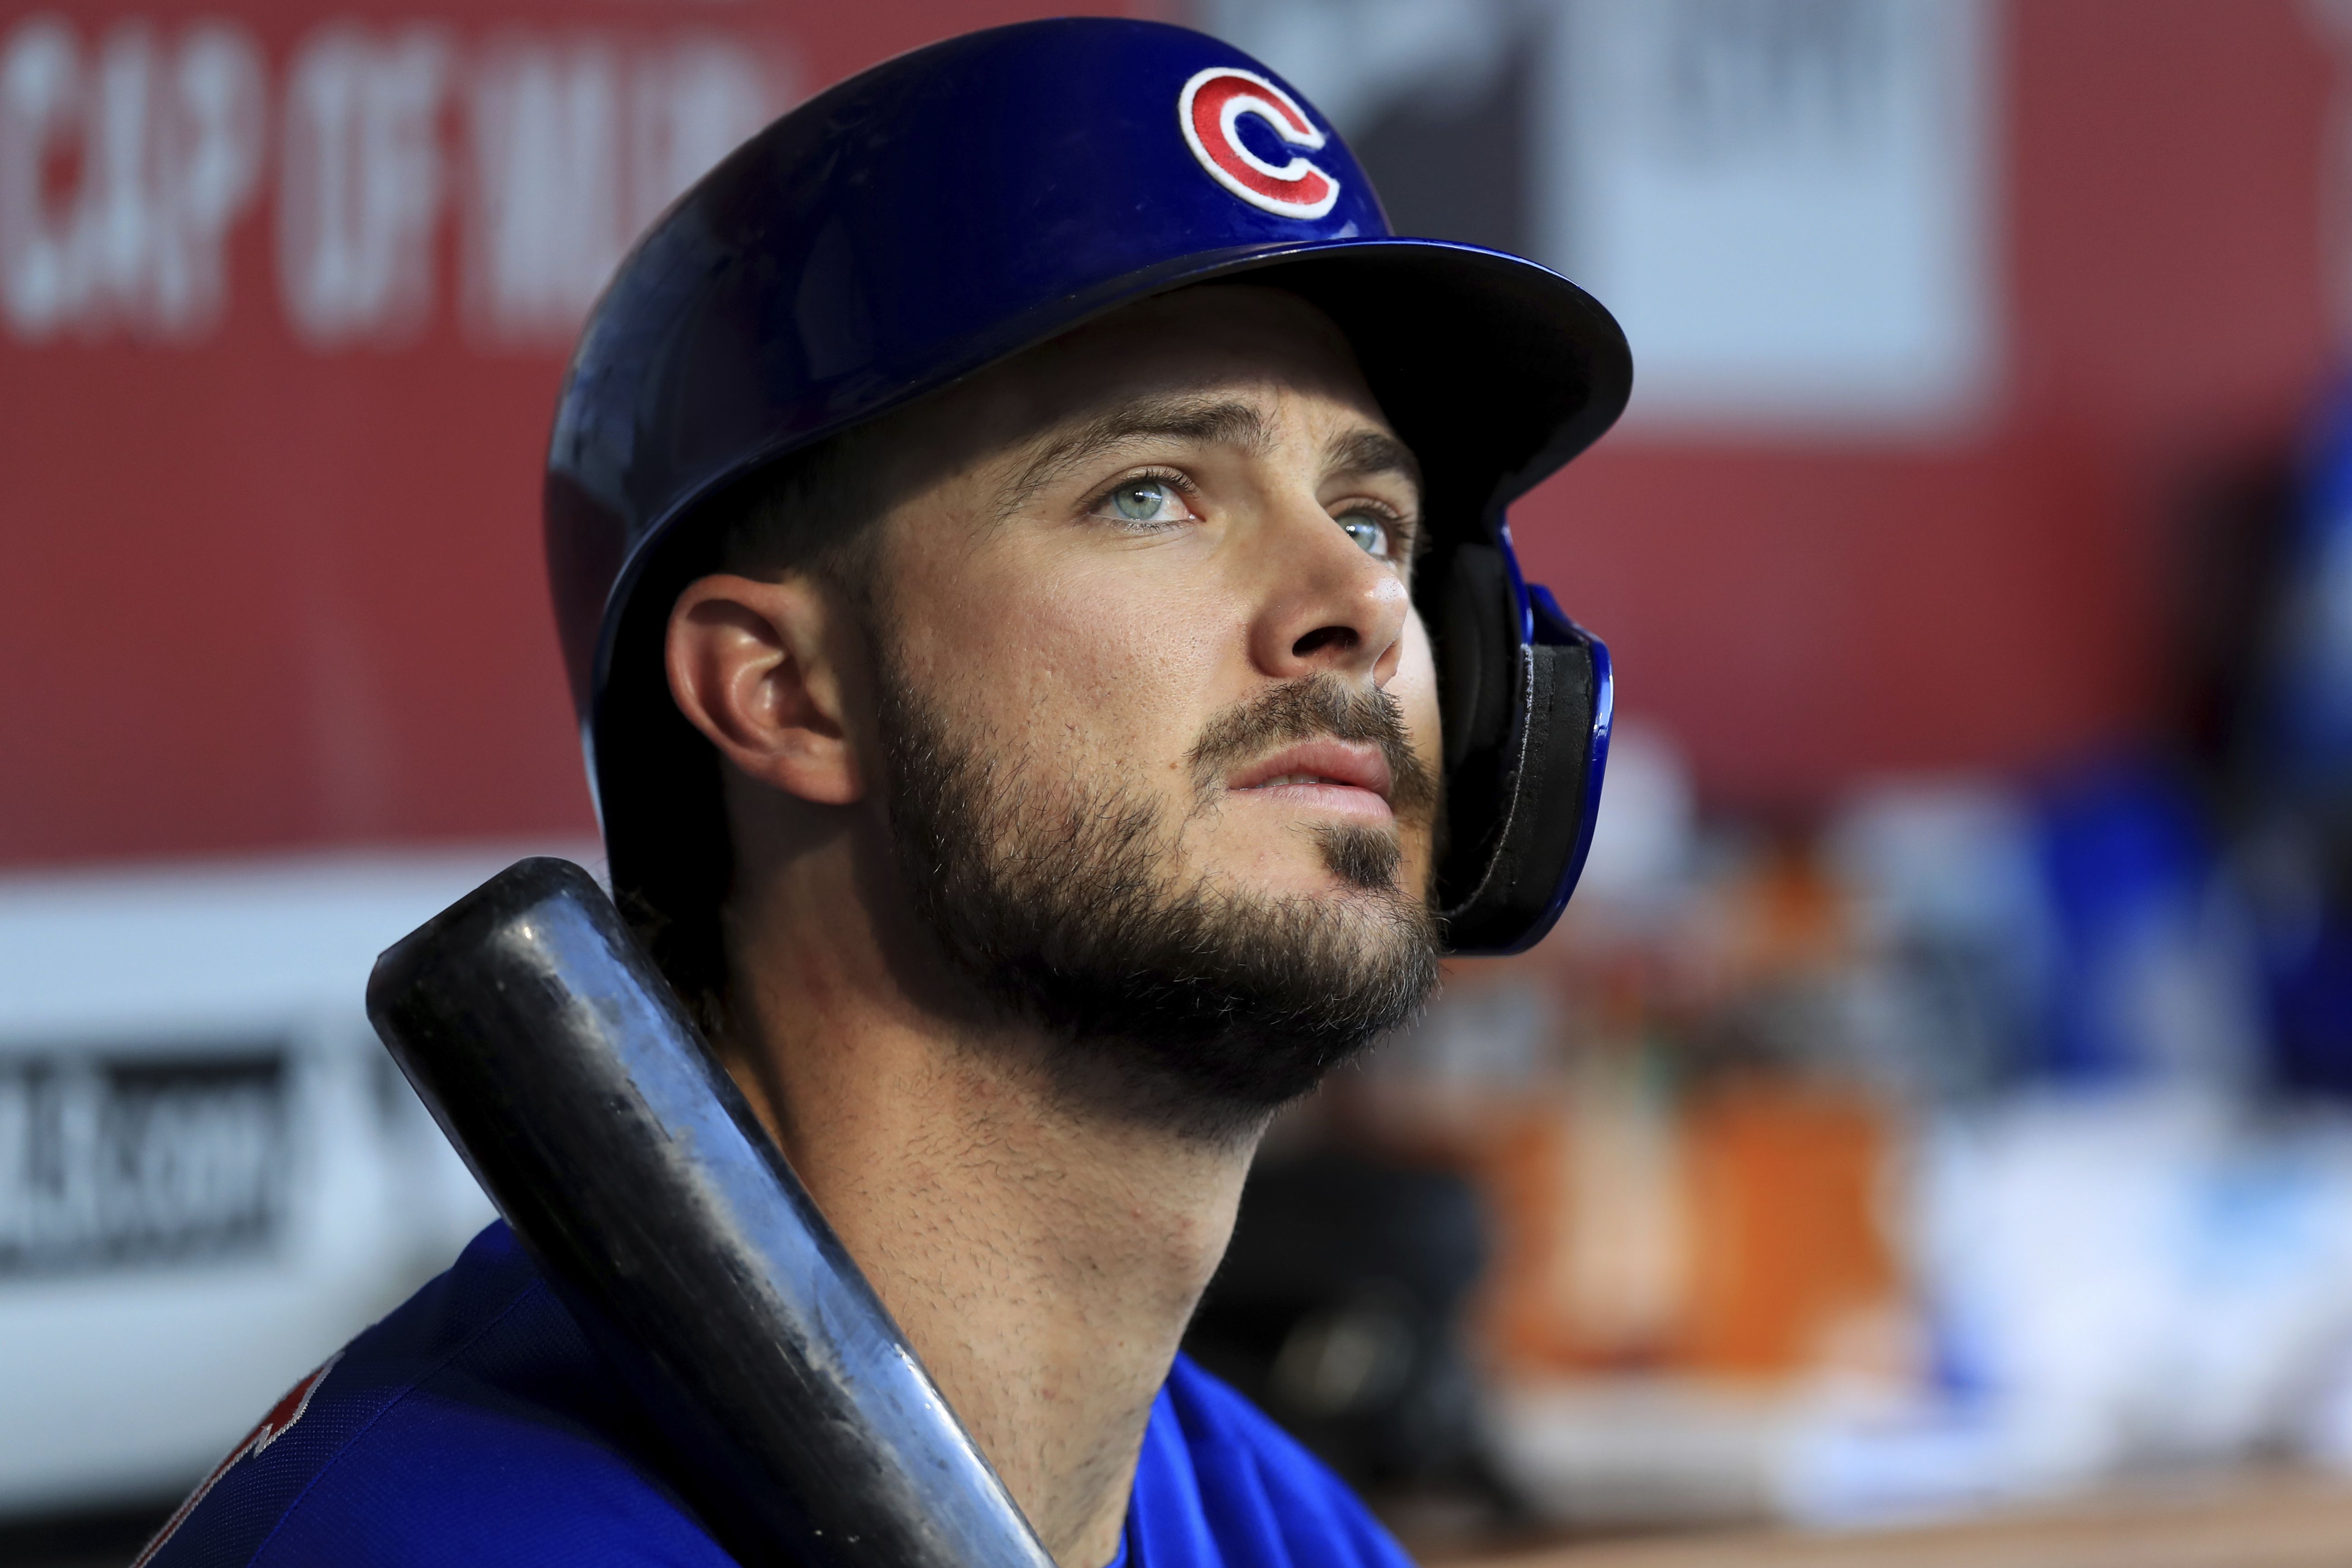 National League All-Star Kris Bryant of the Chicago Cubs looks on